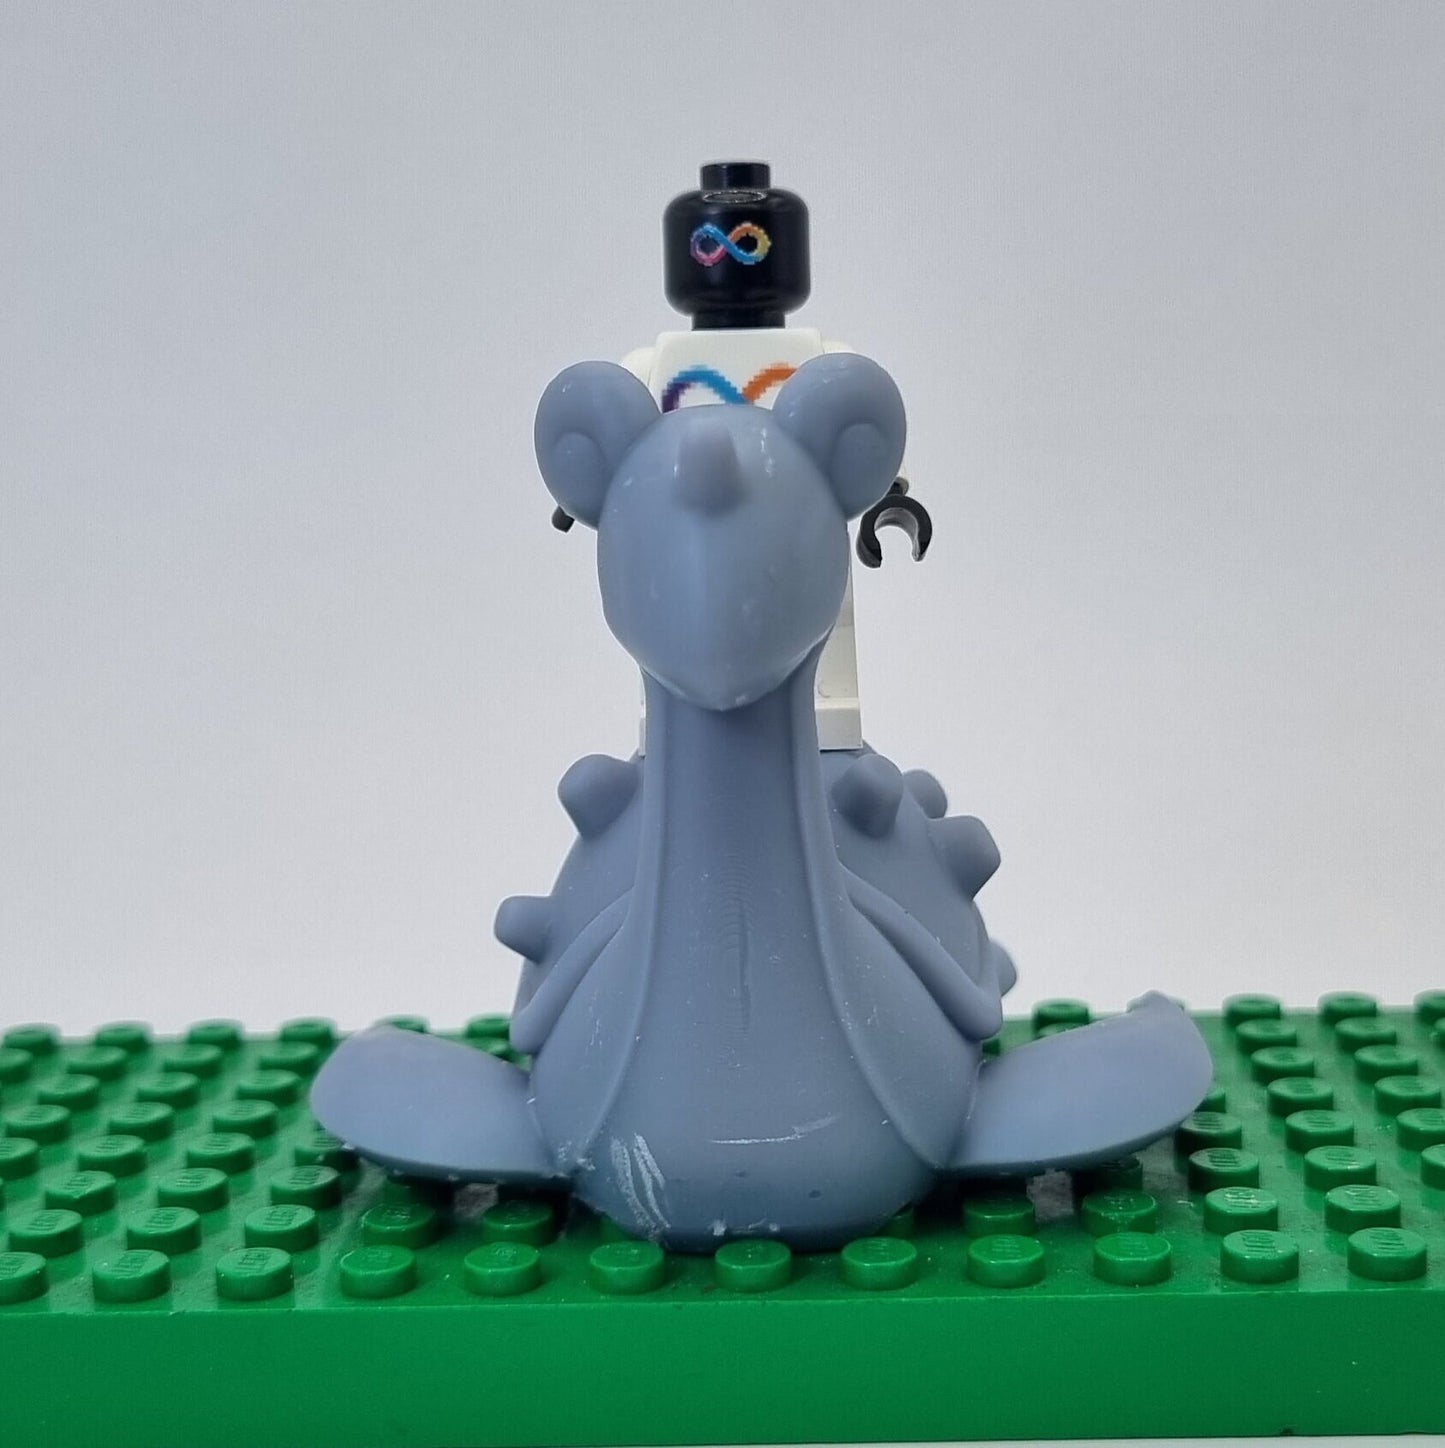 Building toy custom 3D printed animal to catch seaturtle mix